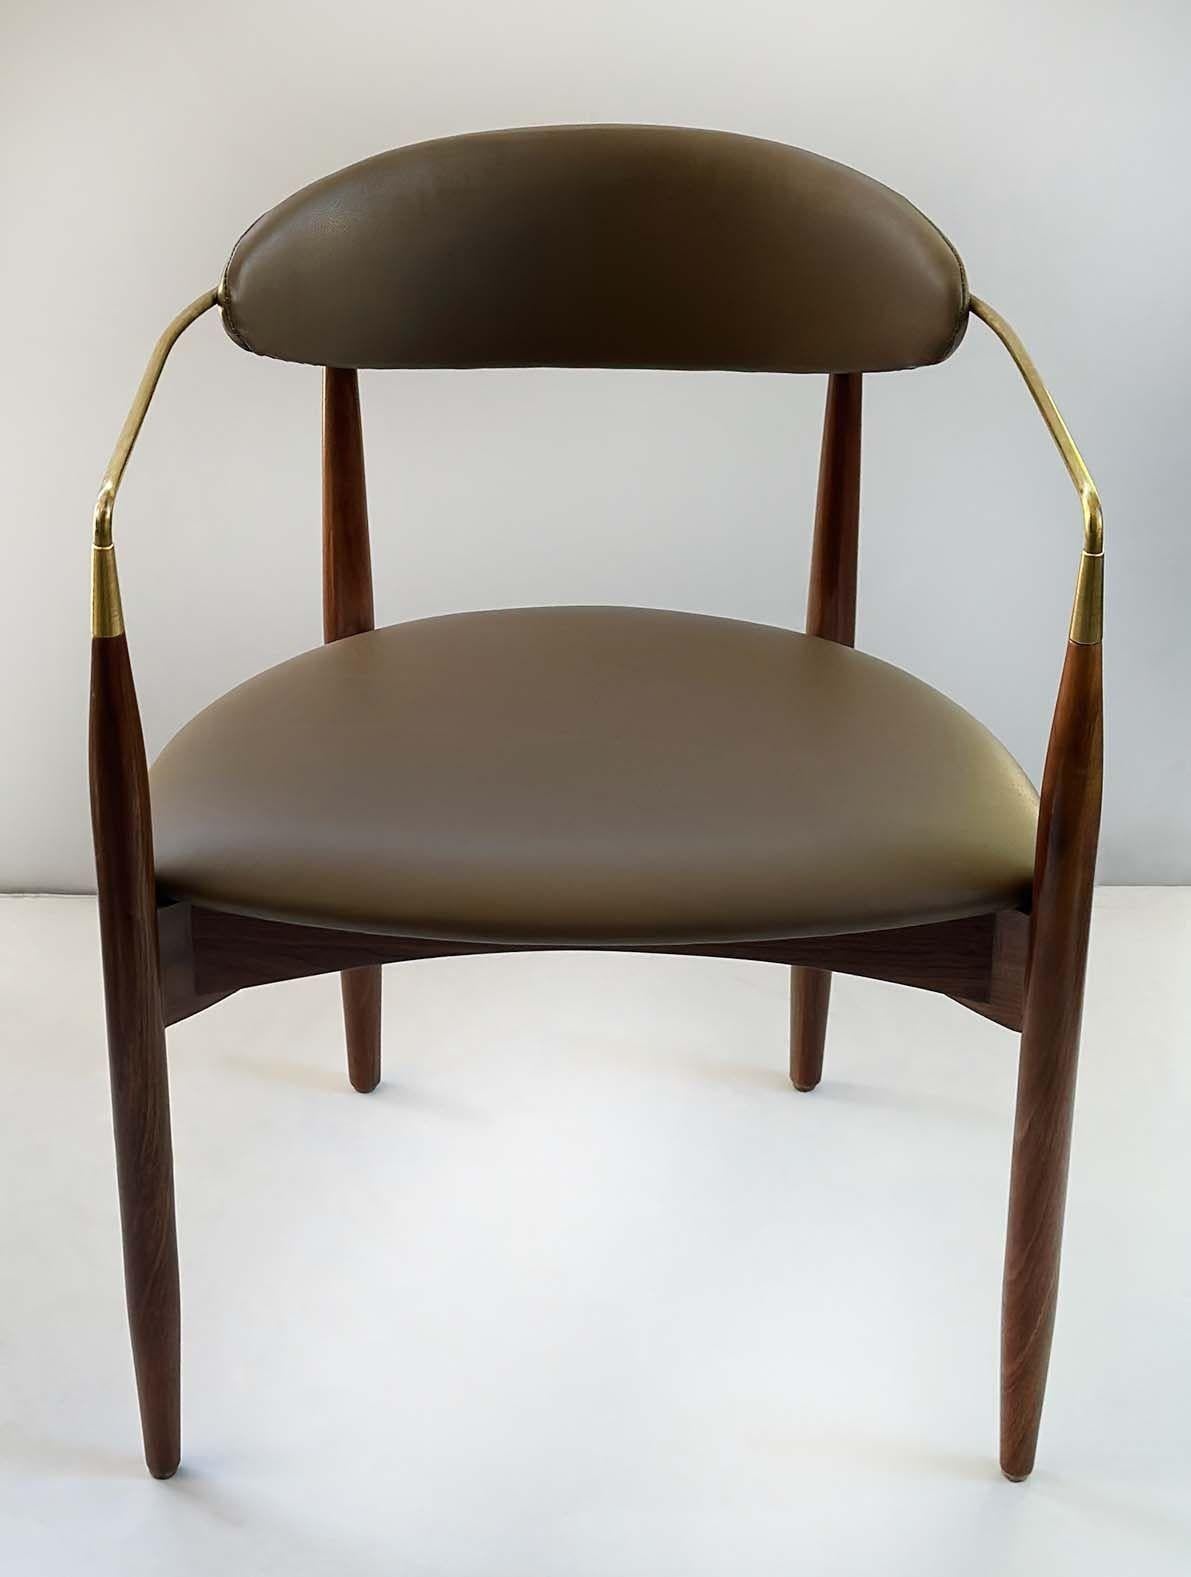 Set of ten Mid-century Viscount chairs with brass, light brown leather and rich walnut wood by Dan Johnson. Made in Denmark, c. 1950's.
Dimensions:
29